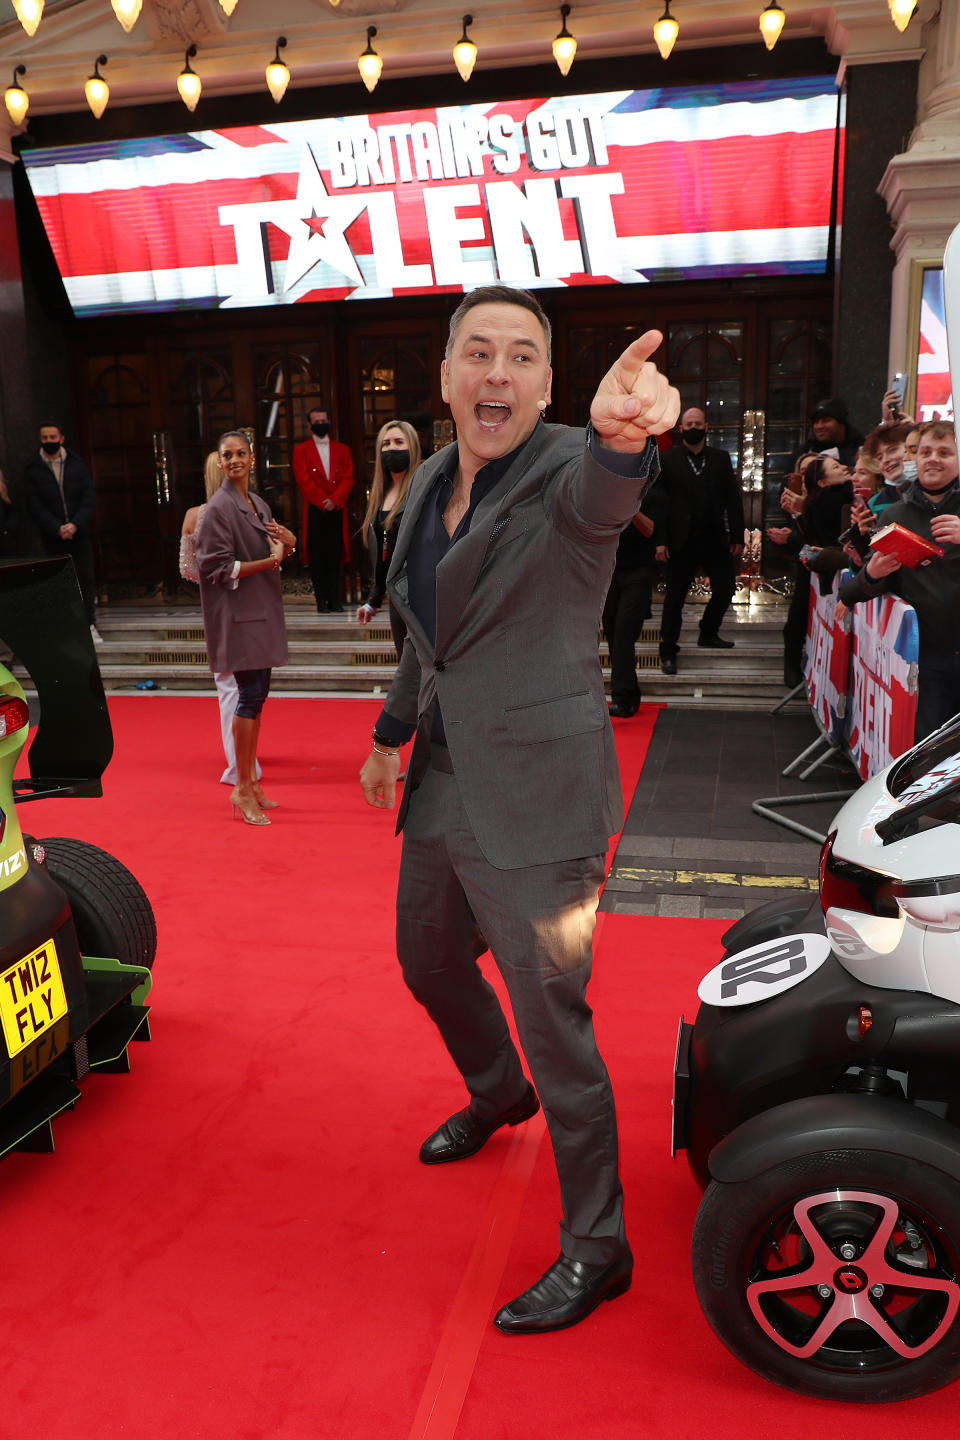 LONDON, UK - JANUARY 20: David Walliams arrives to audition for Britain's Got Talent at the London Palladium on January 20, 2022 in London, England.  (Photo by Neil Mockford/Getty Images)